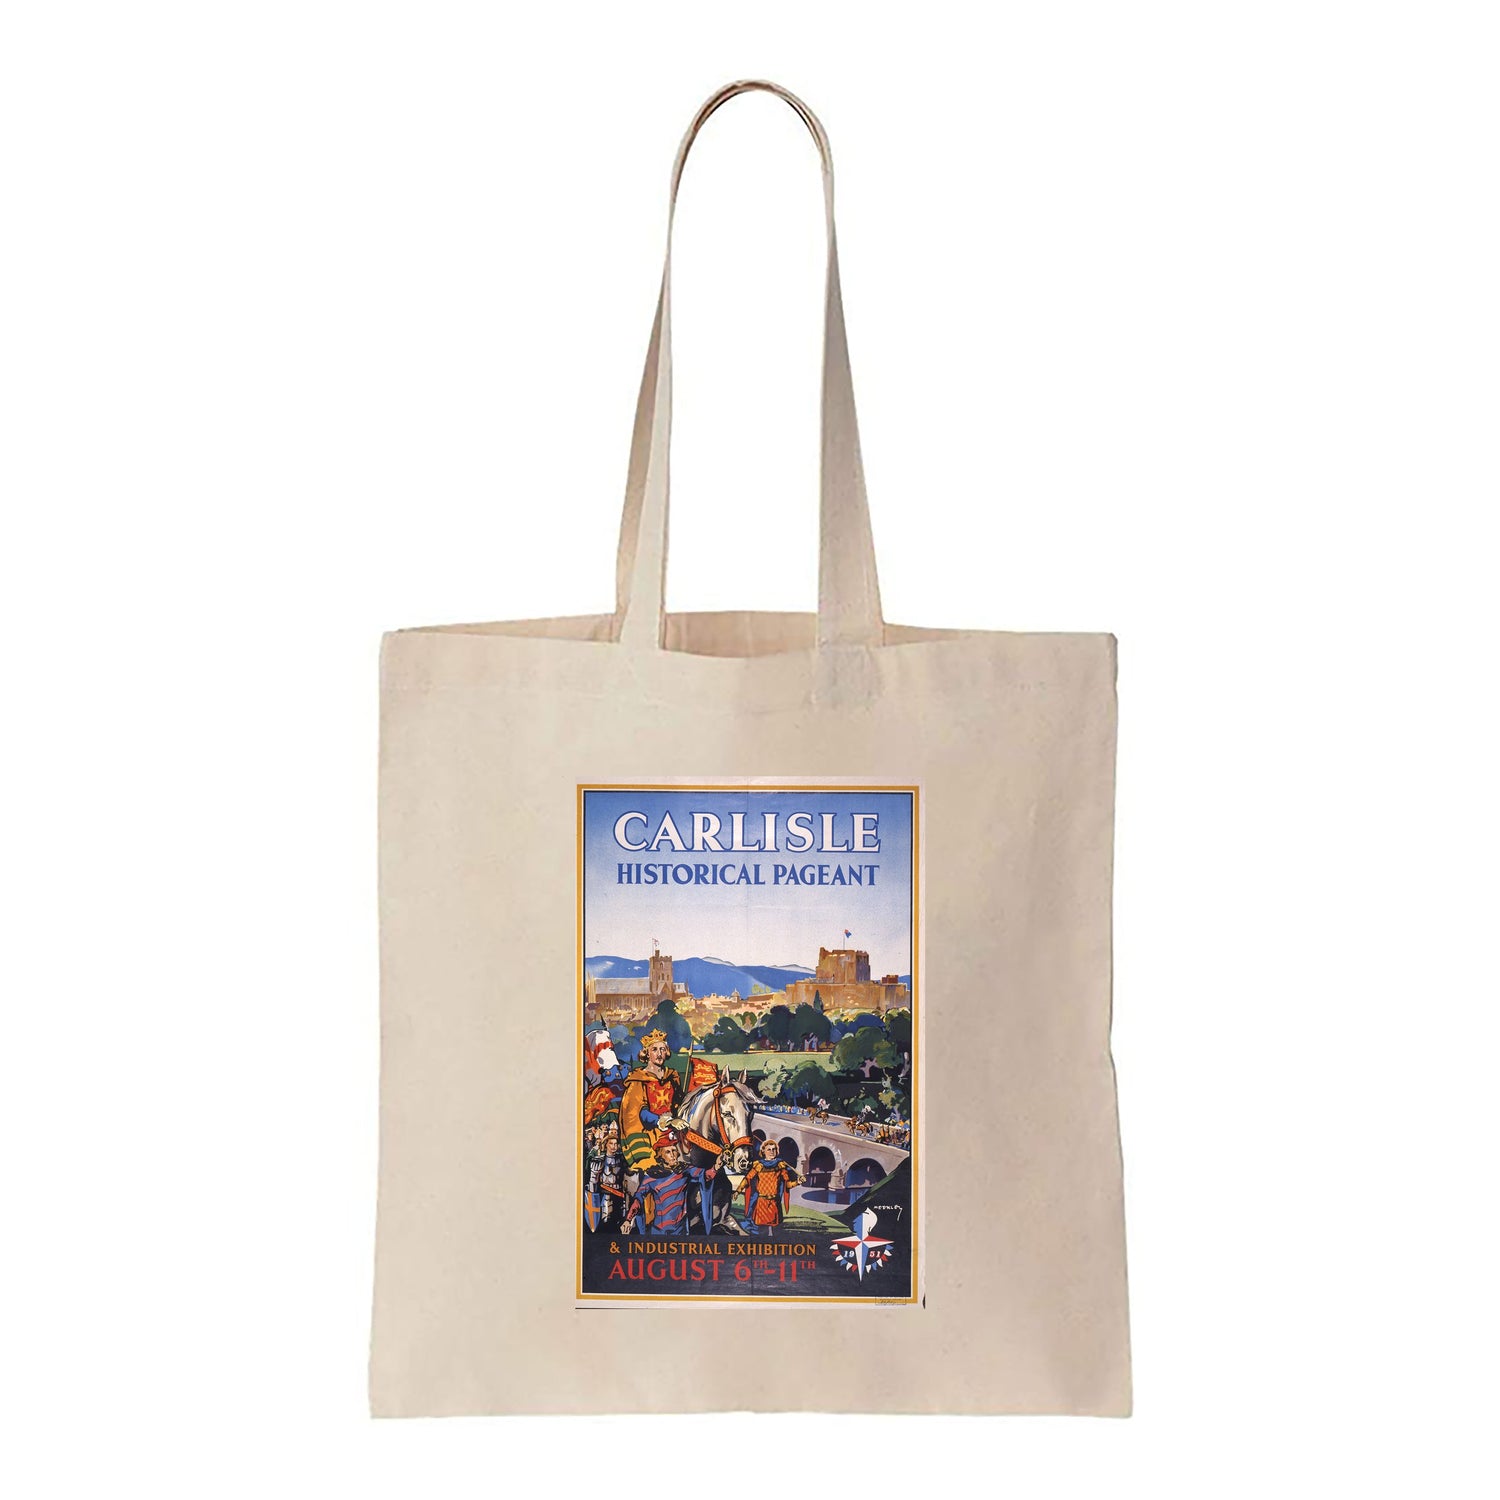 Carlisle Historical Pageant - Canvas Tote Bag